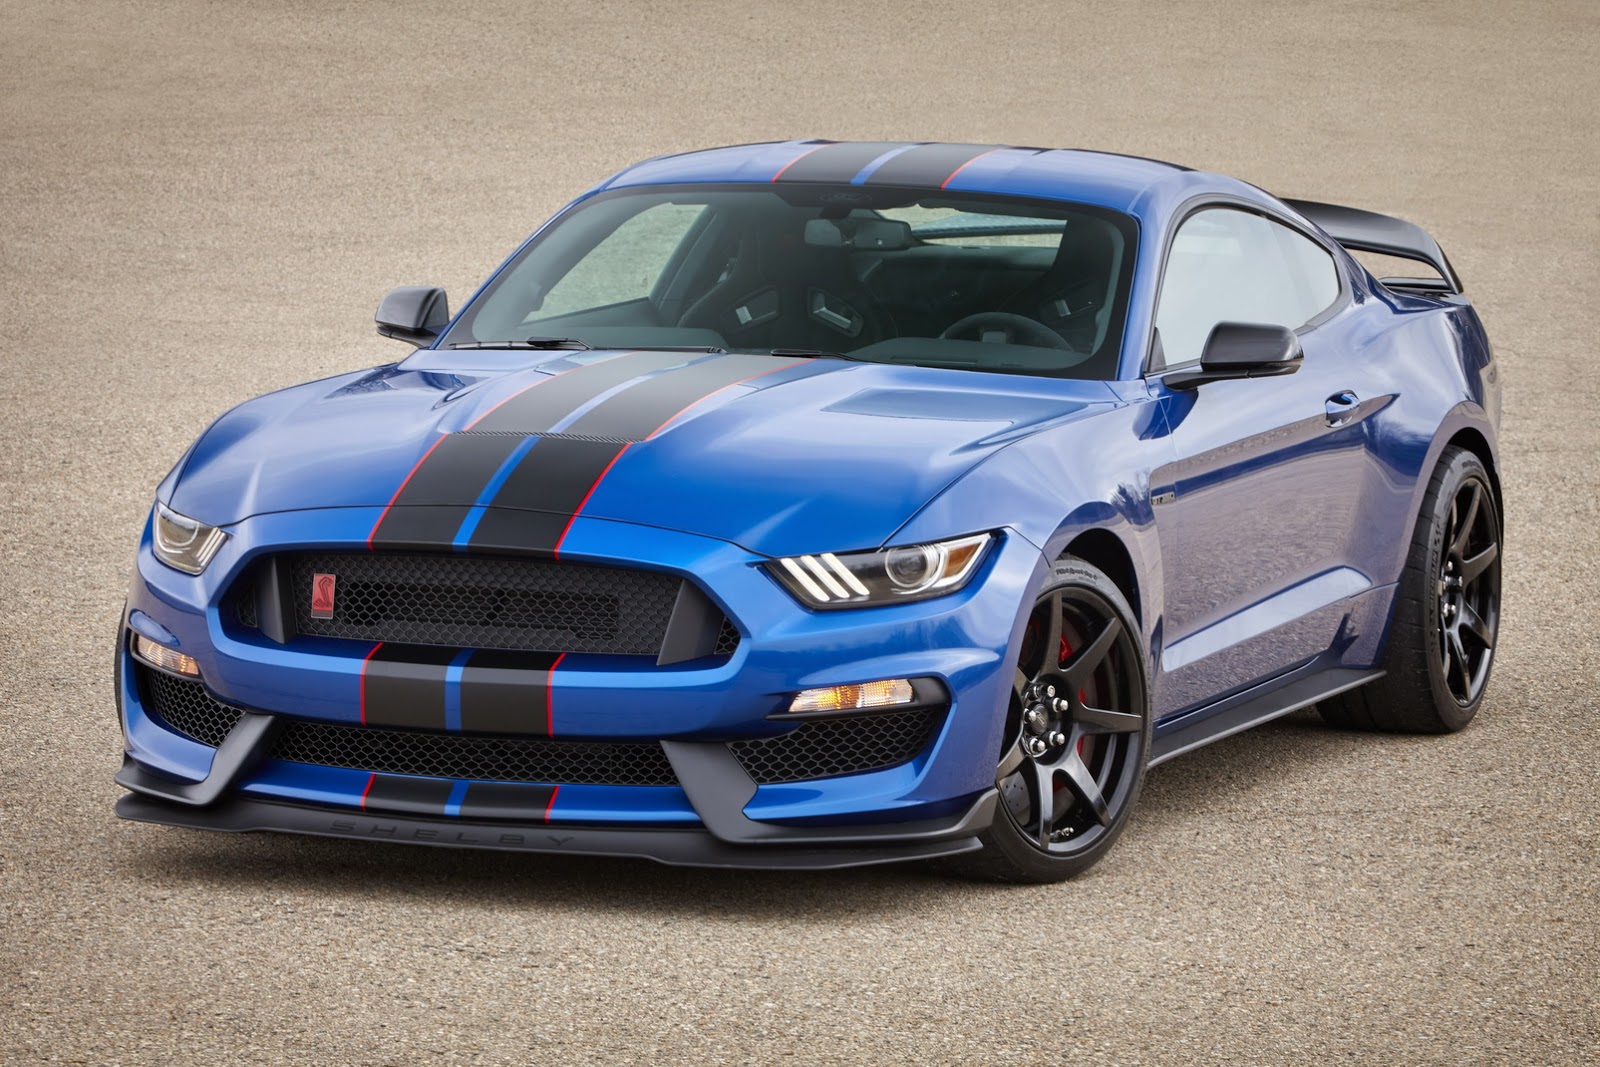 2017 Ford Shelby Gt350 Mustang | 2017 - 2018 Best Cars Reviews